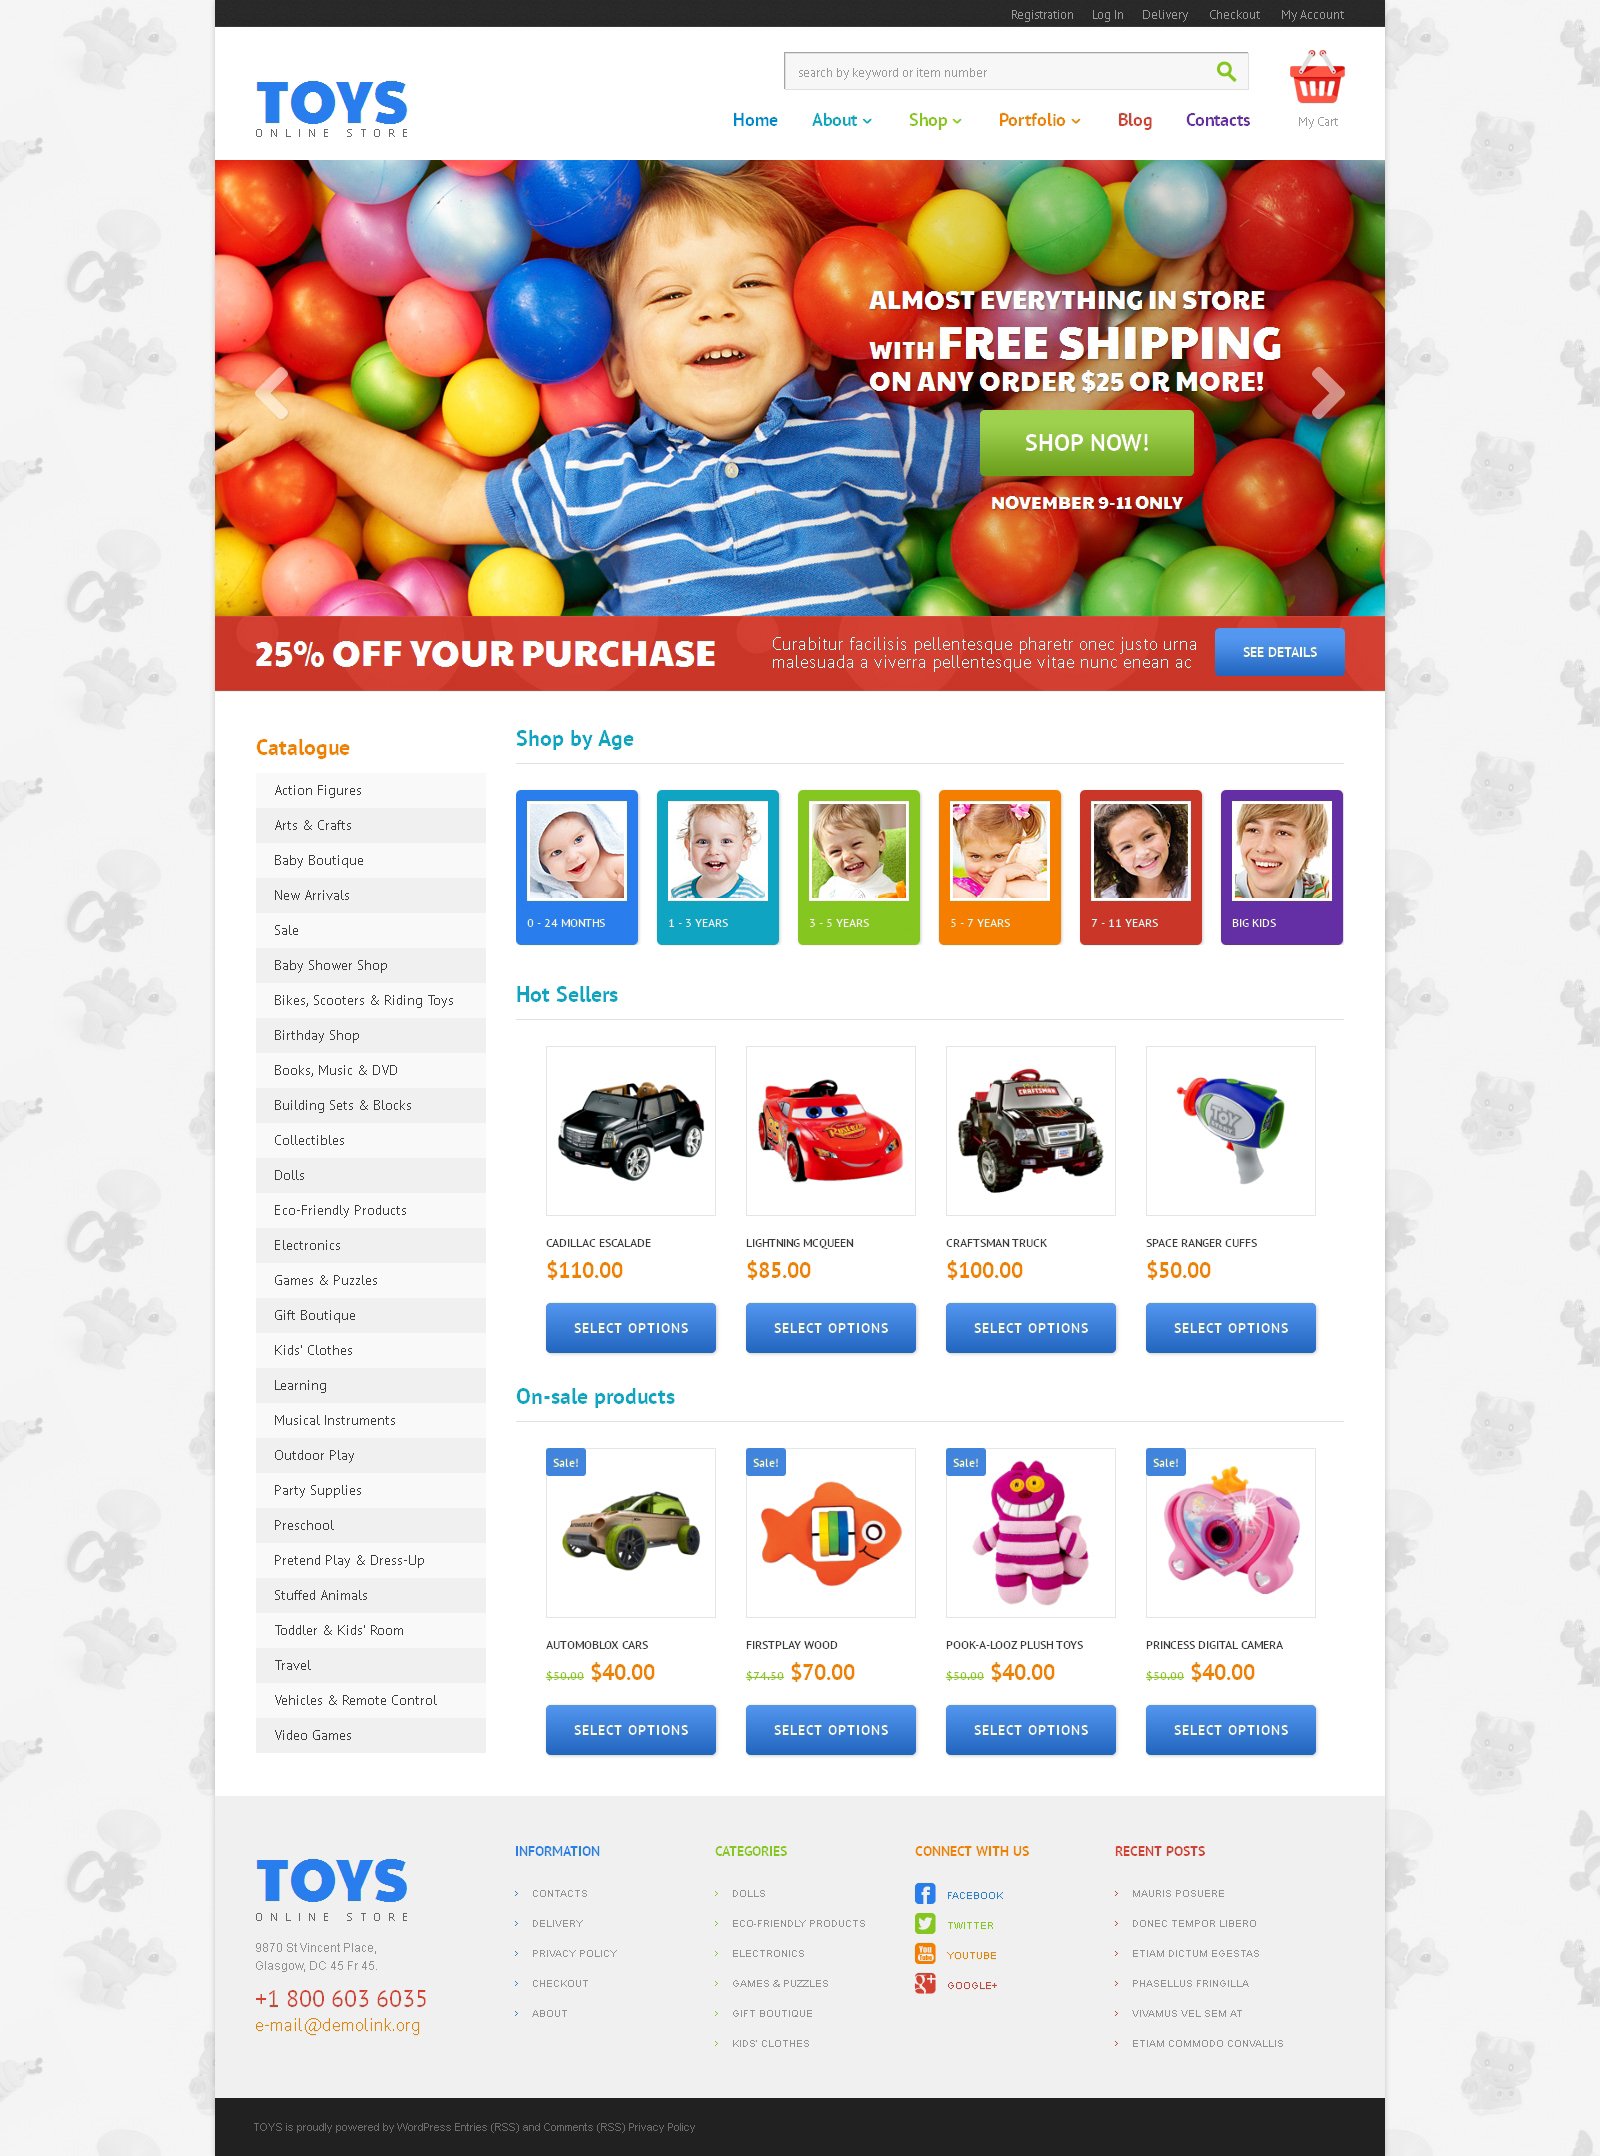 online toy store